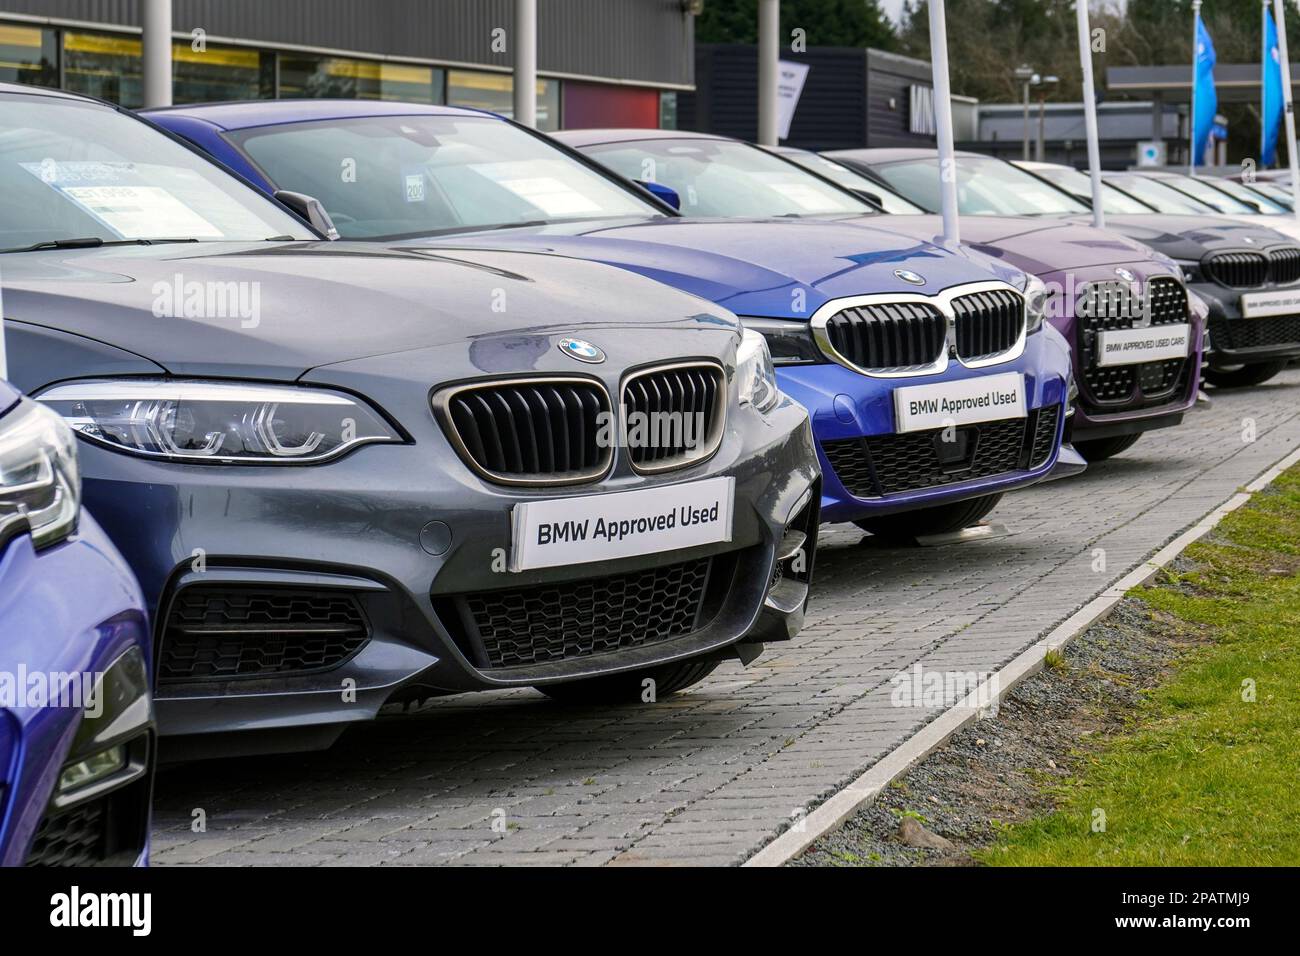 Selection of secondhand BMW cars for sale in a garage forecourt, UK Stock Photo